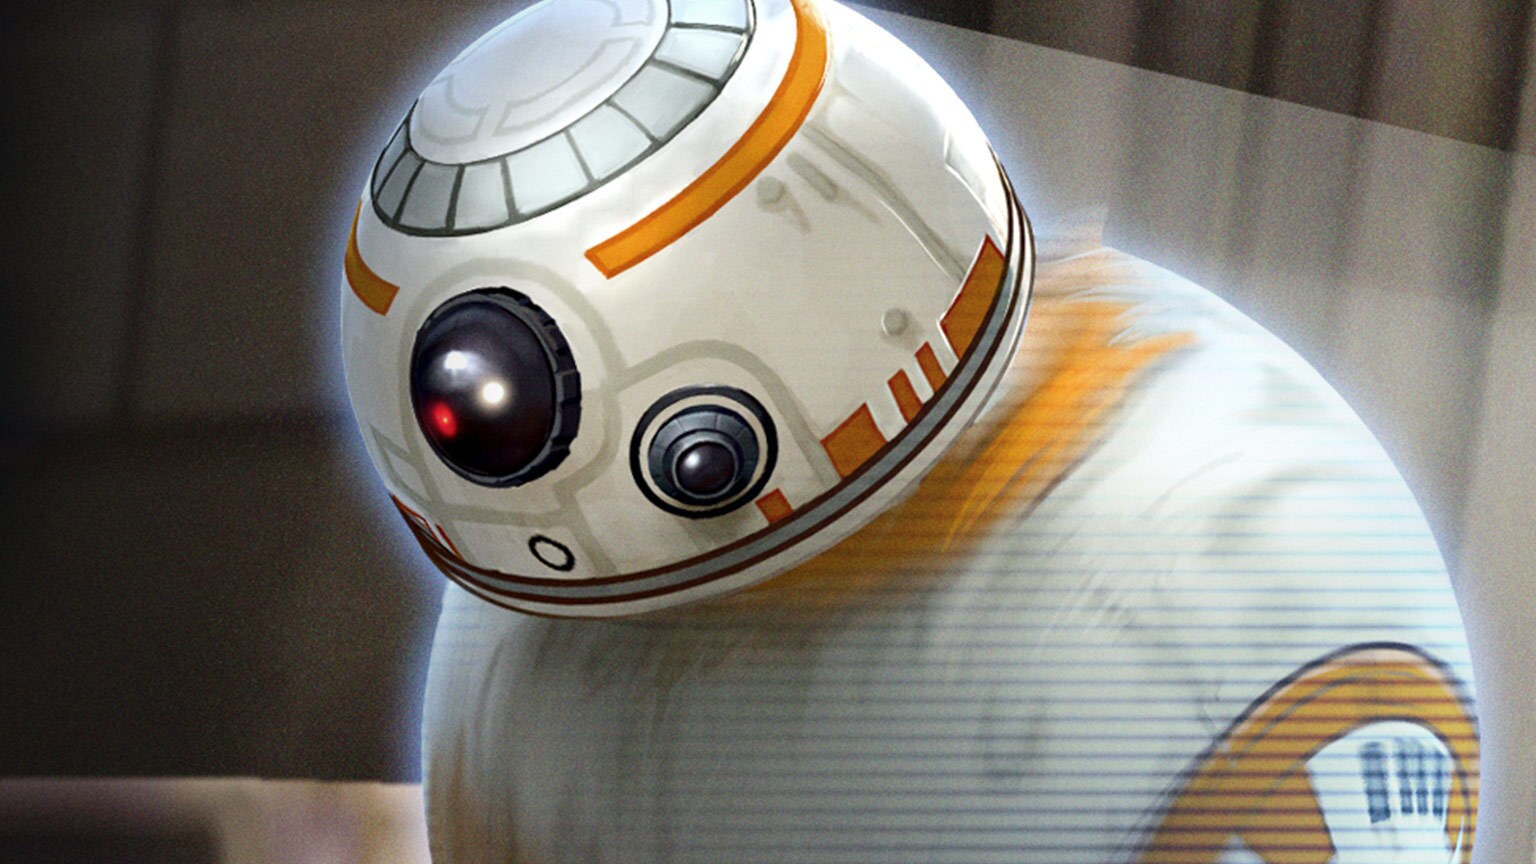 Get That Droid: BB-8 Arrives in Star Wars: Galaxy of Heroes